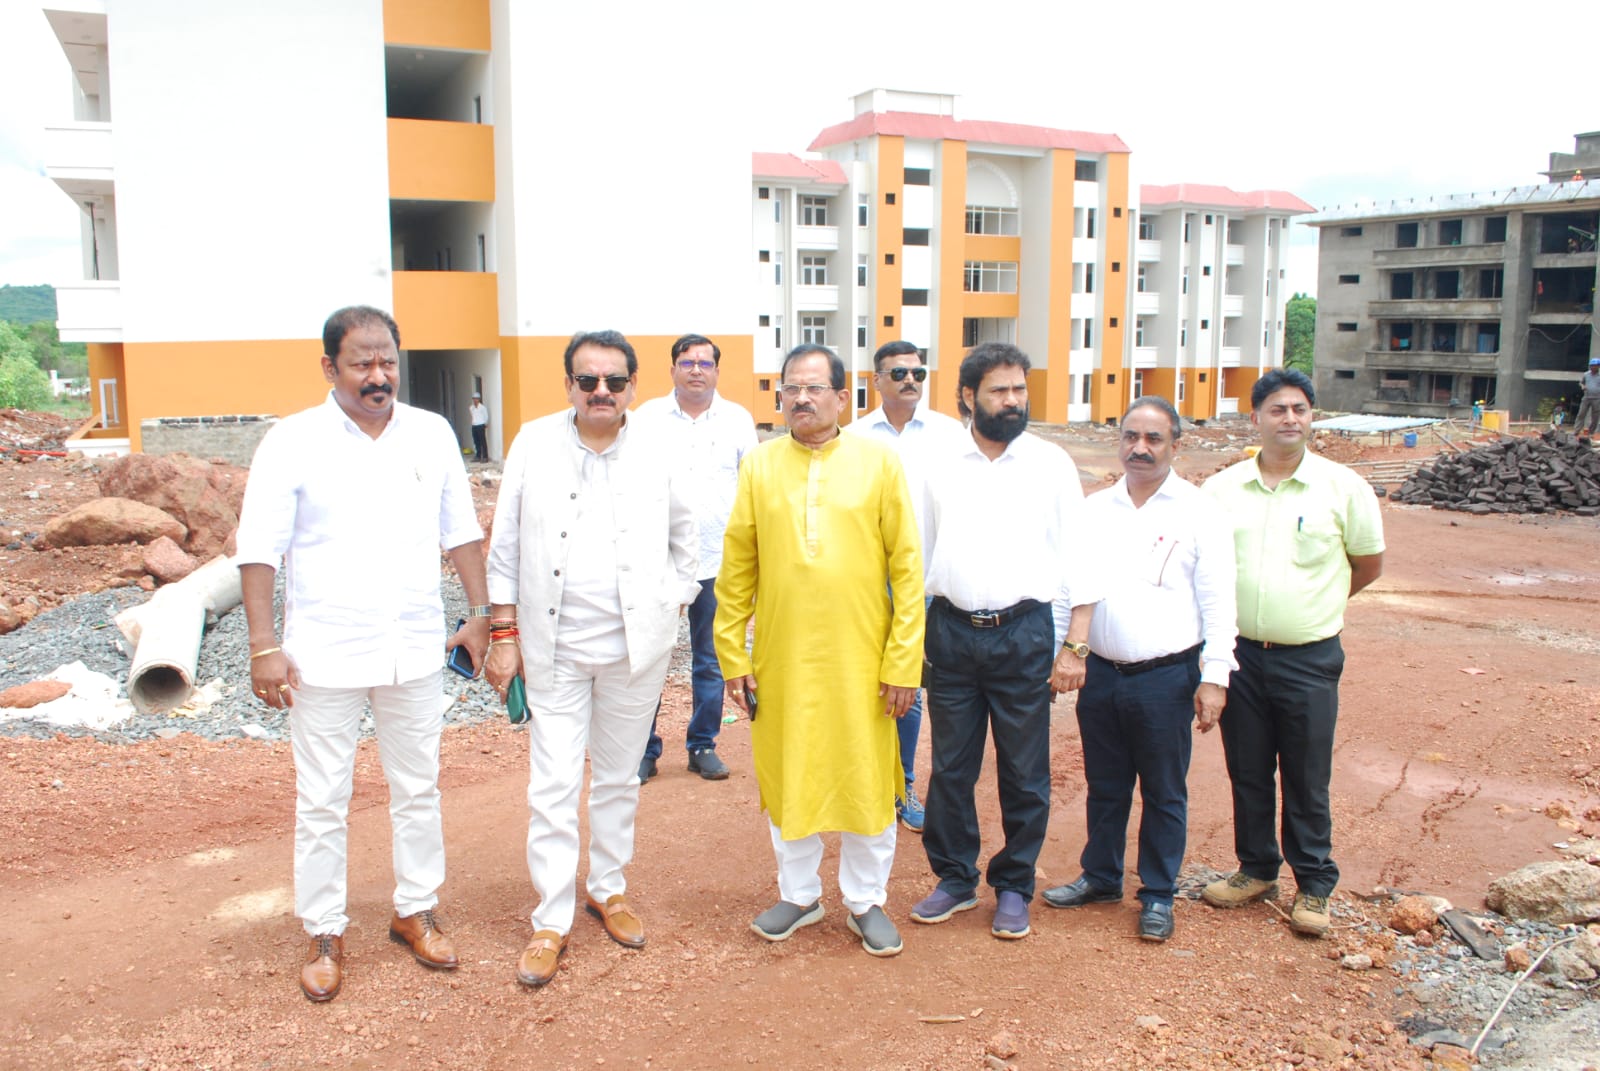 Union Minister SP Singh Baghel alongwith Shripad Naik visited AYUSH Hospital  and MOPA Airport site at Pernem, Goa AYUSH hospital will be inaugurated in  next 3-4 months- Shripad Naik MOPA Airport is ready for operations from  September 1, 2022 ...